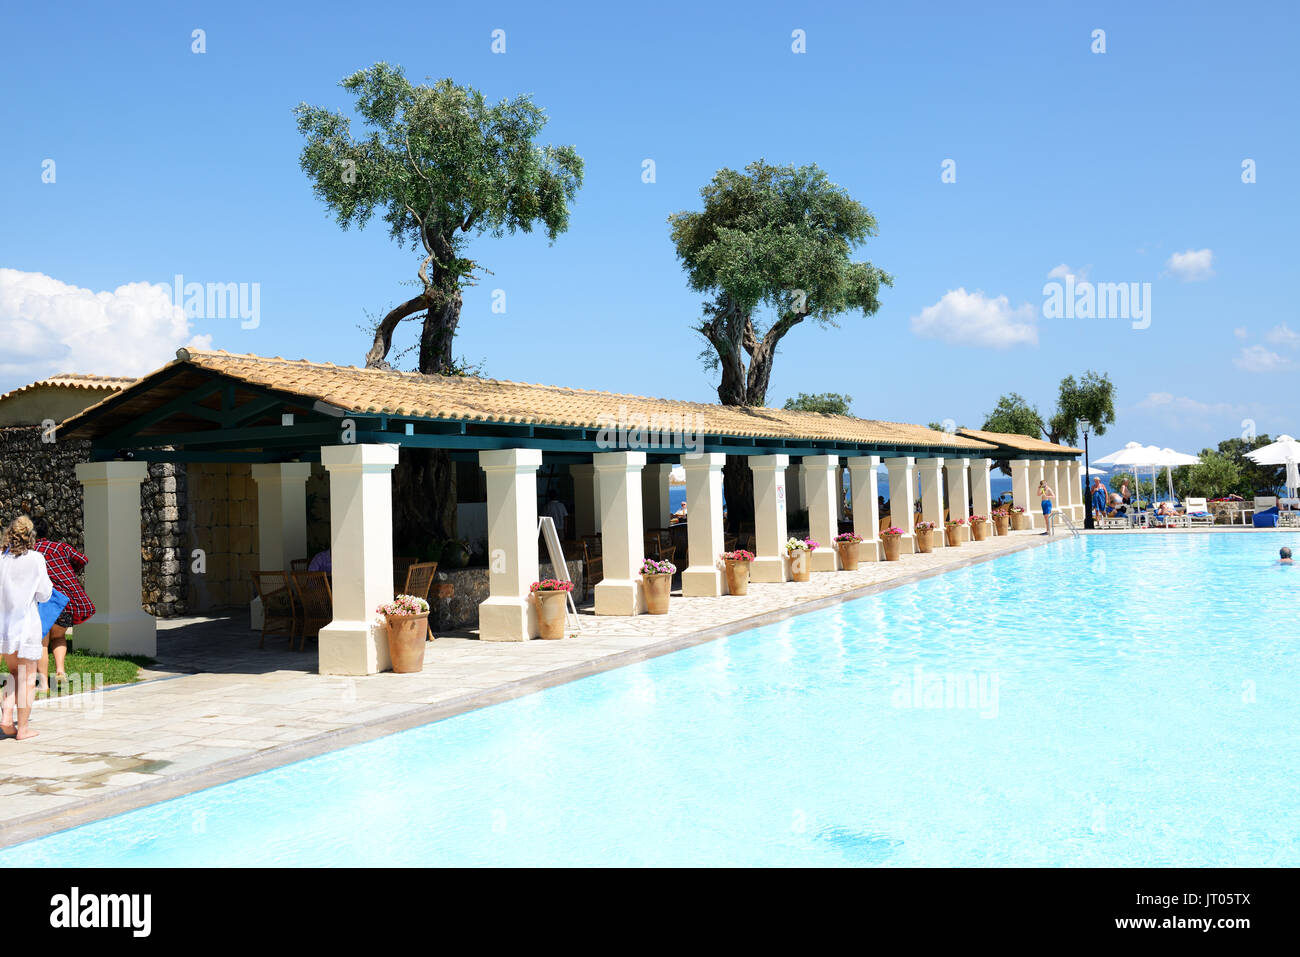 CORFU, GREEES - MAY 16: The tourists are on vacation in luxury hotel on May 16, 2016 in Corfu, Greece. Up to 16 mln tourists is expected to visit Gree Stock Photo